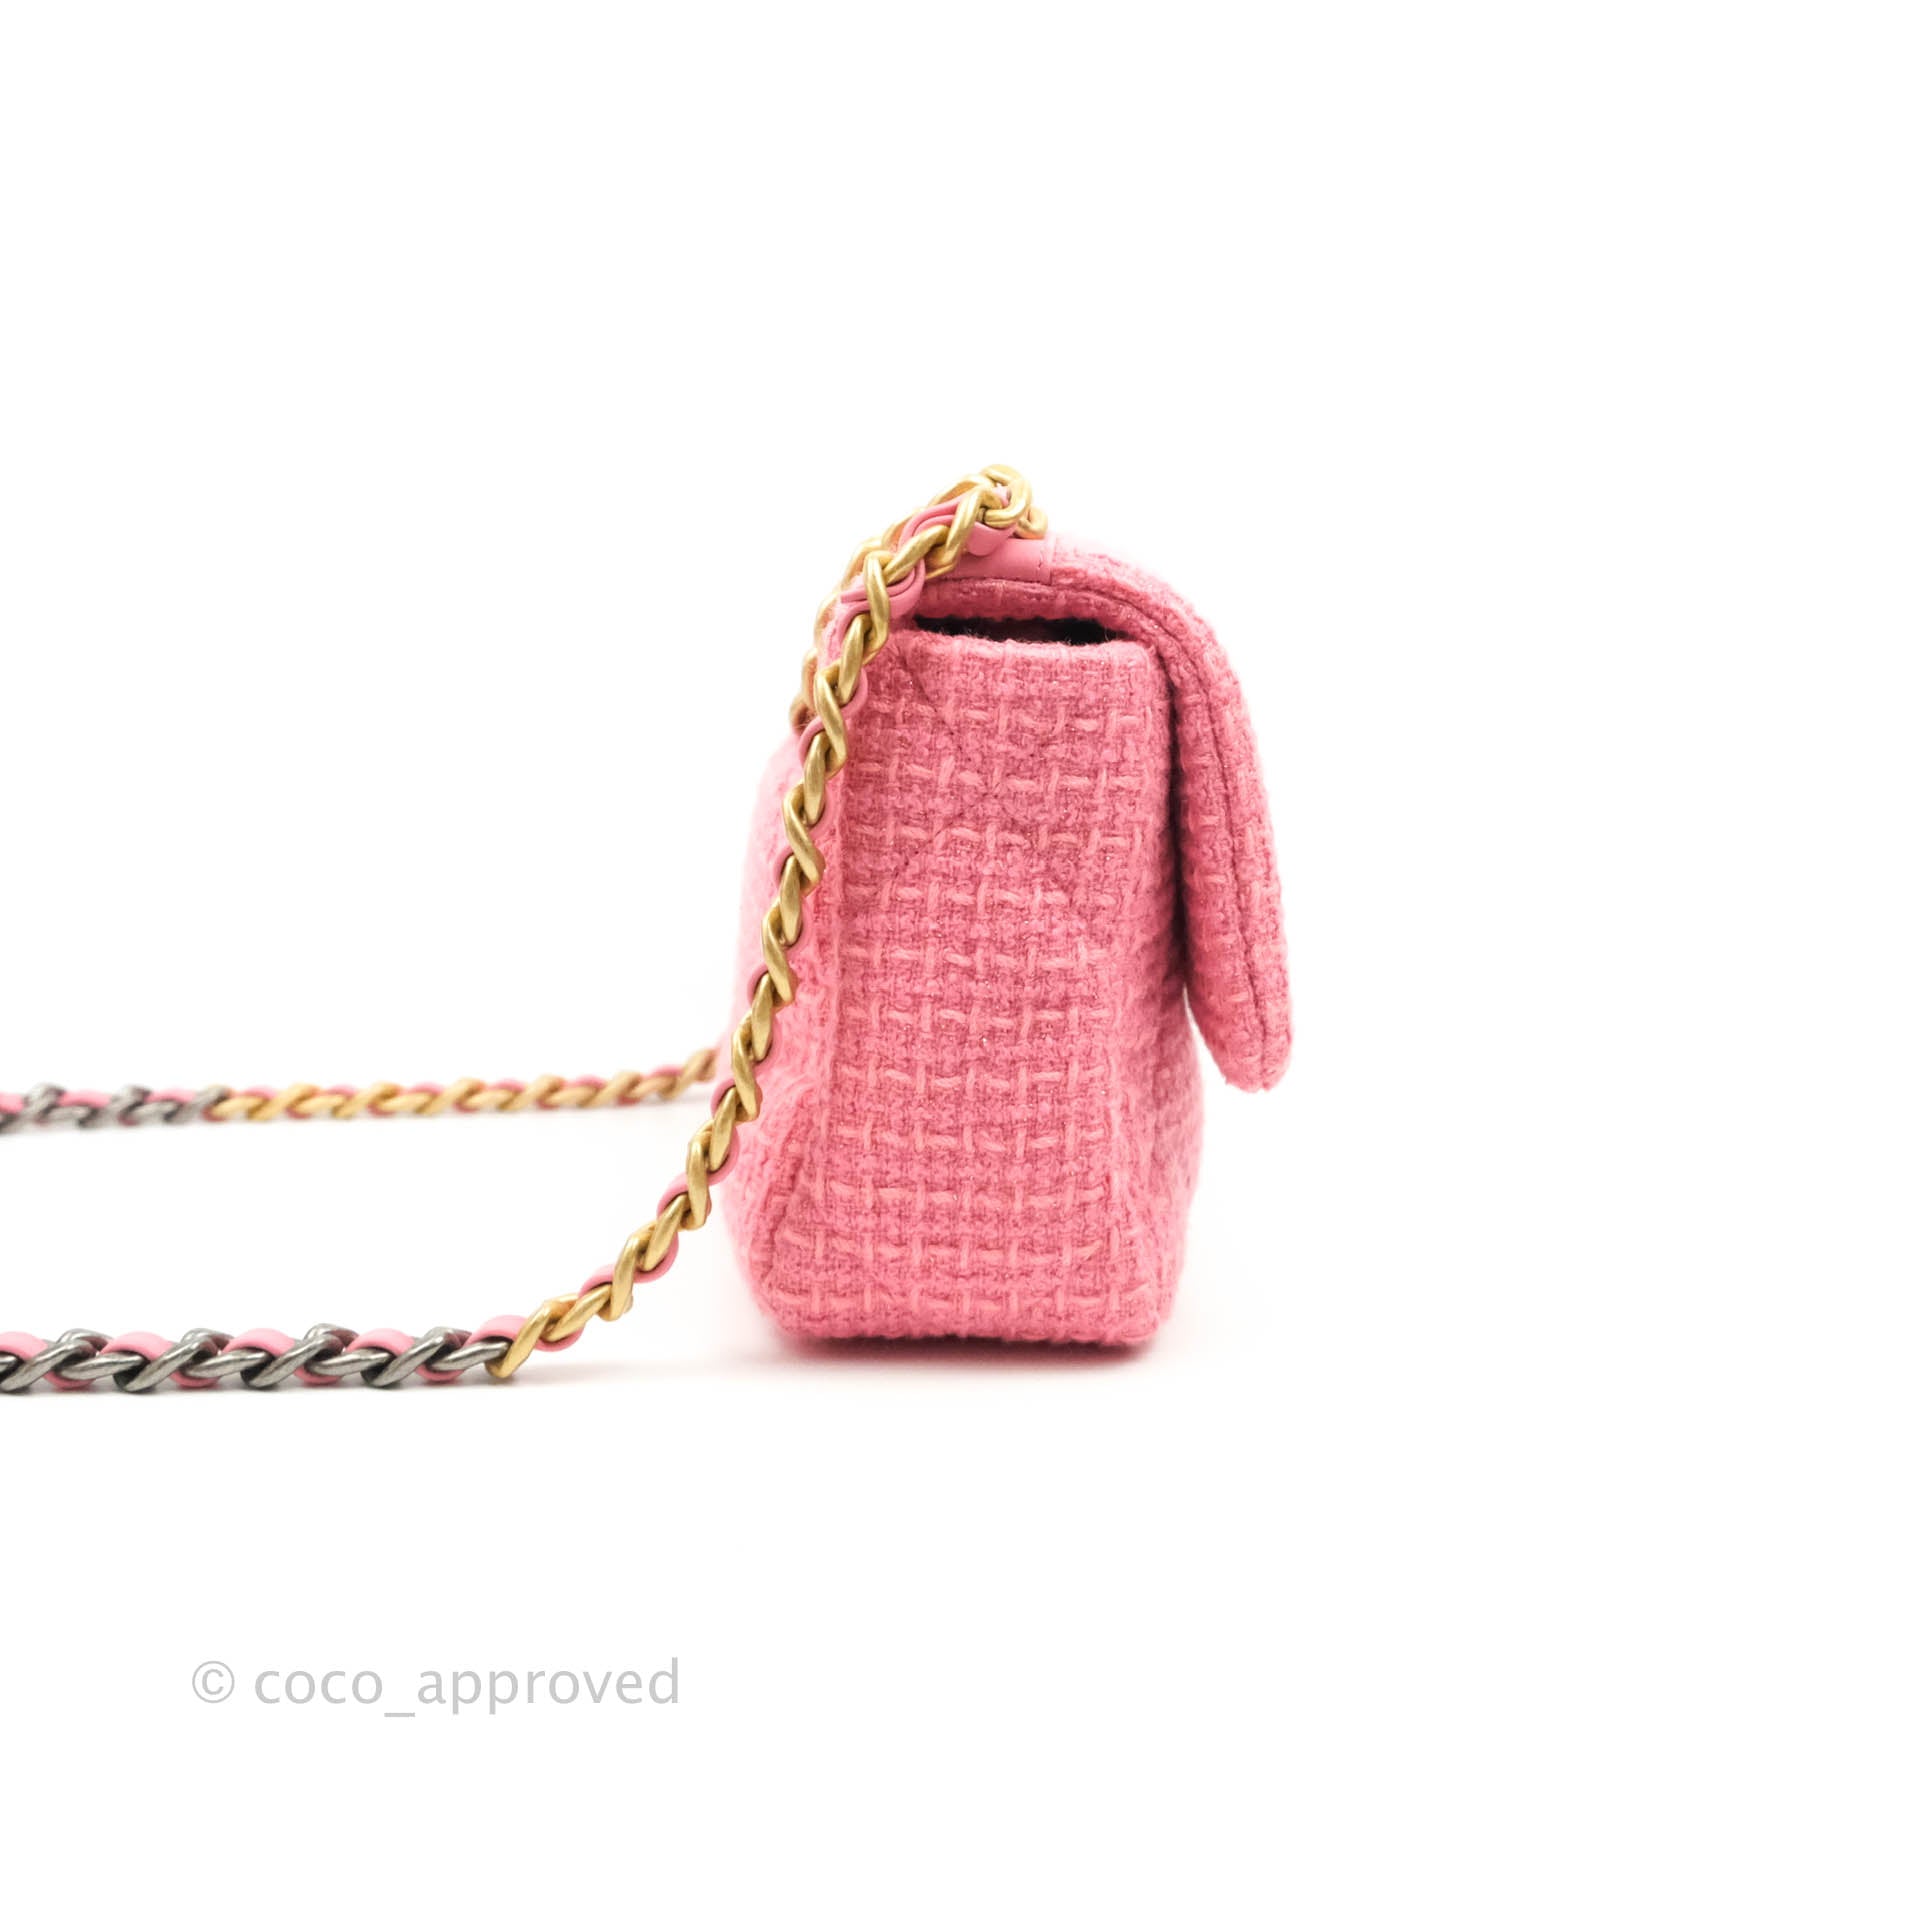 Chanel - Authenticated Chanel 19 Handbag - Tweed Pink Plain for Women, Very Good Condition